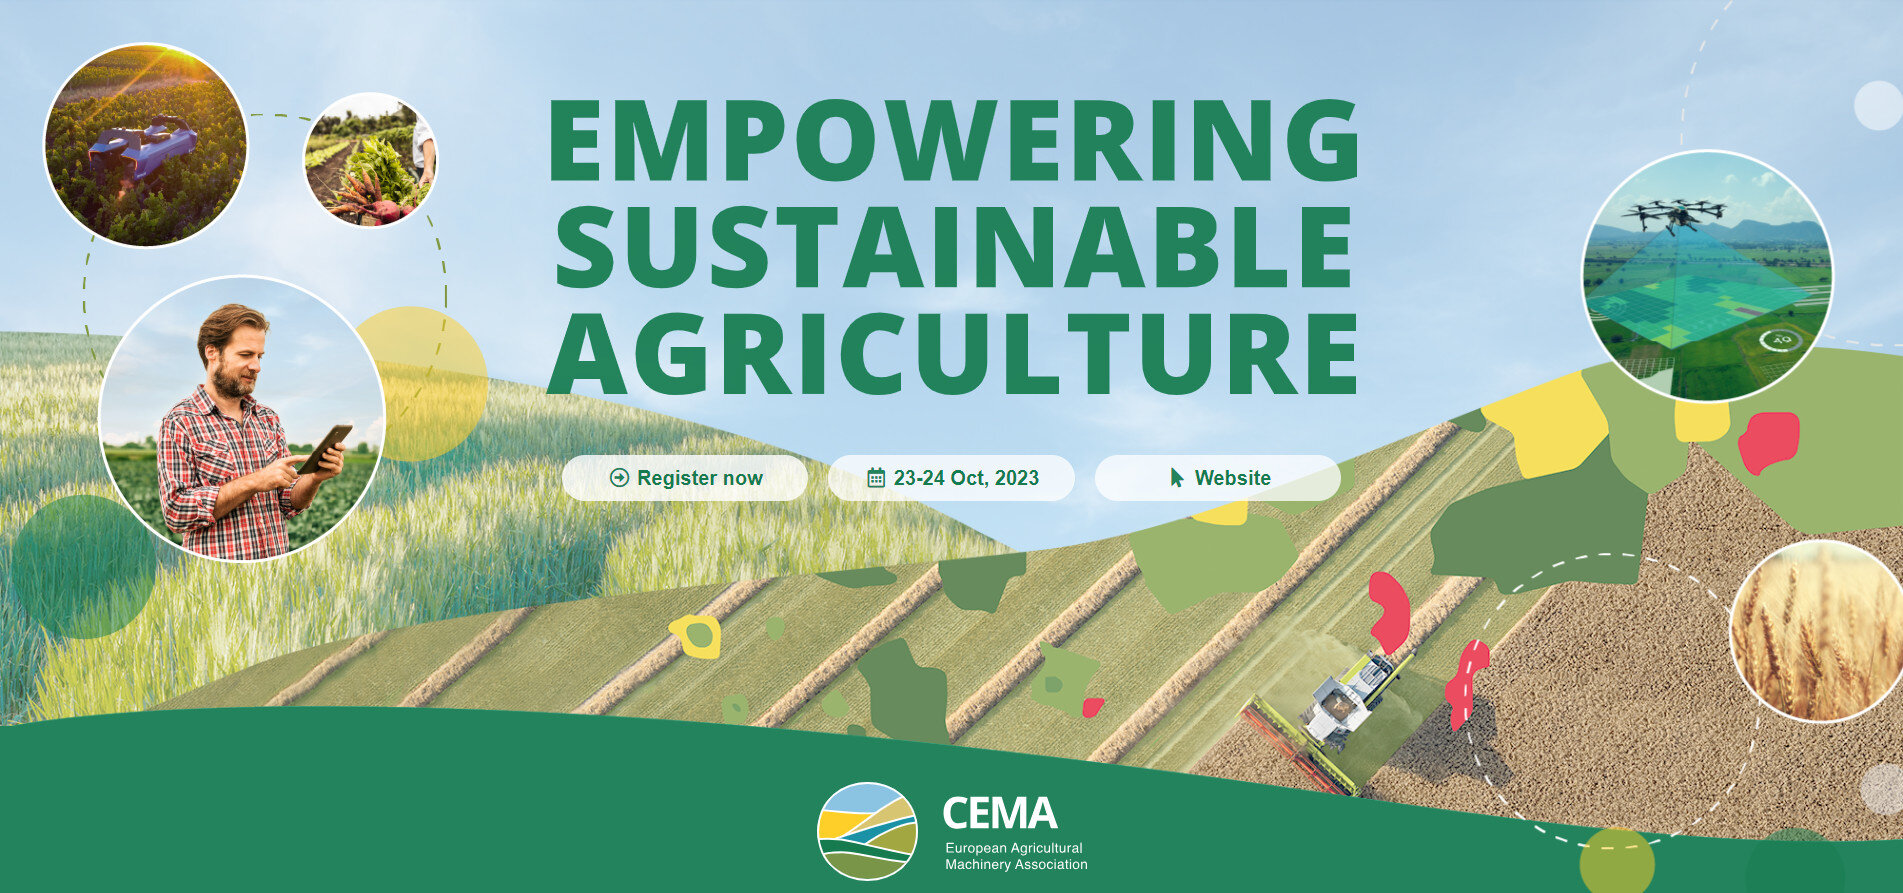 CEMA Summit 2023 Empowering Sustainable Agriculture SmartAgriHubs